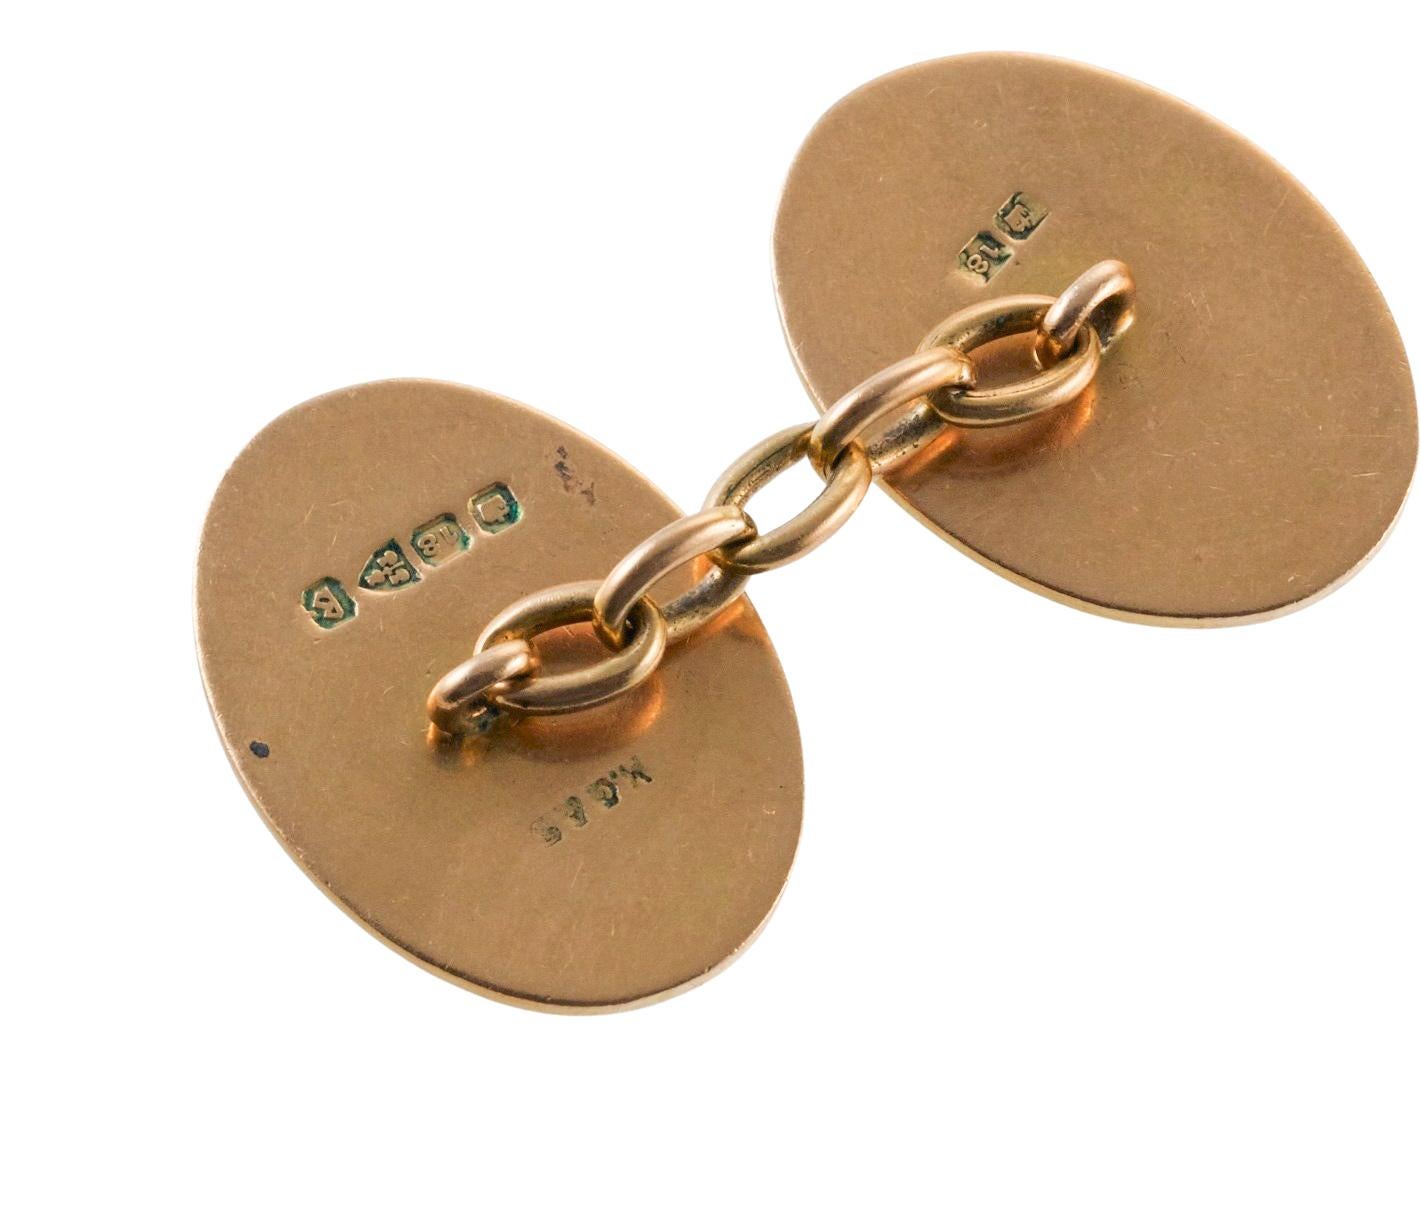 English Enamel Gold Road to Ruins Gambling Cufflinks In Excellent Condition For Sale In New York, NY